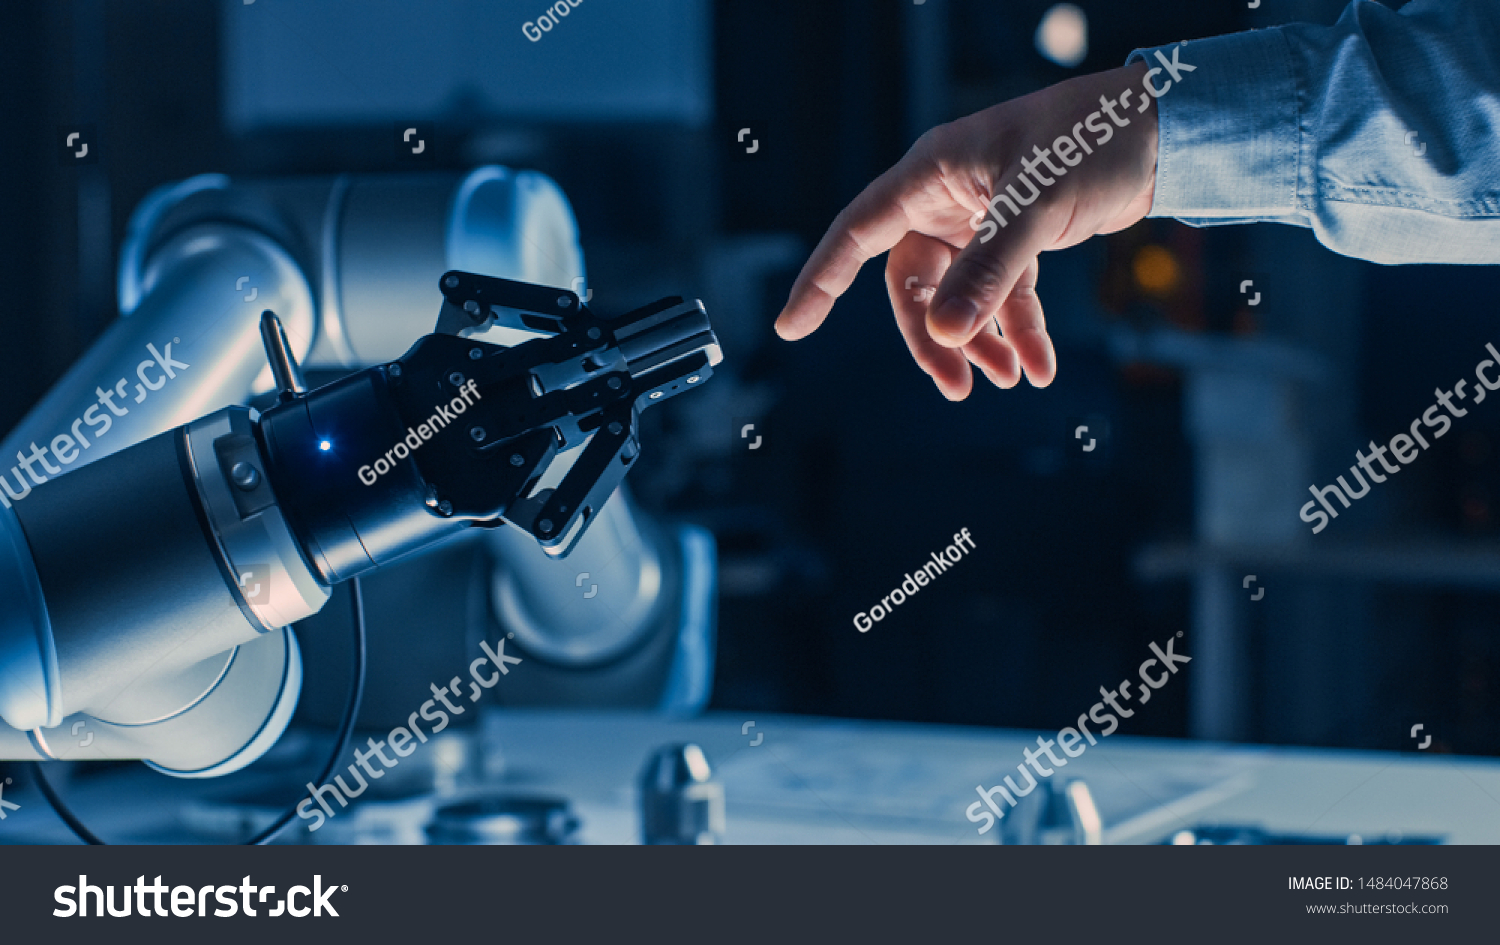 Futuristic Robot Arm Touches Human Hand in Humanity and Artificial Intelligence Unifying Gesture. Conscious Technology Meets Humanity. Concept Inspired by Michelangelo's Creation of Adam #1484047868